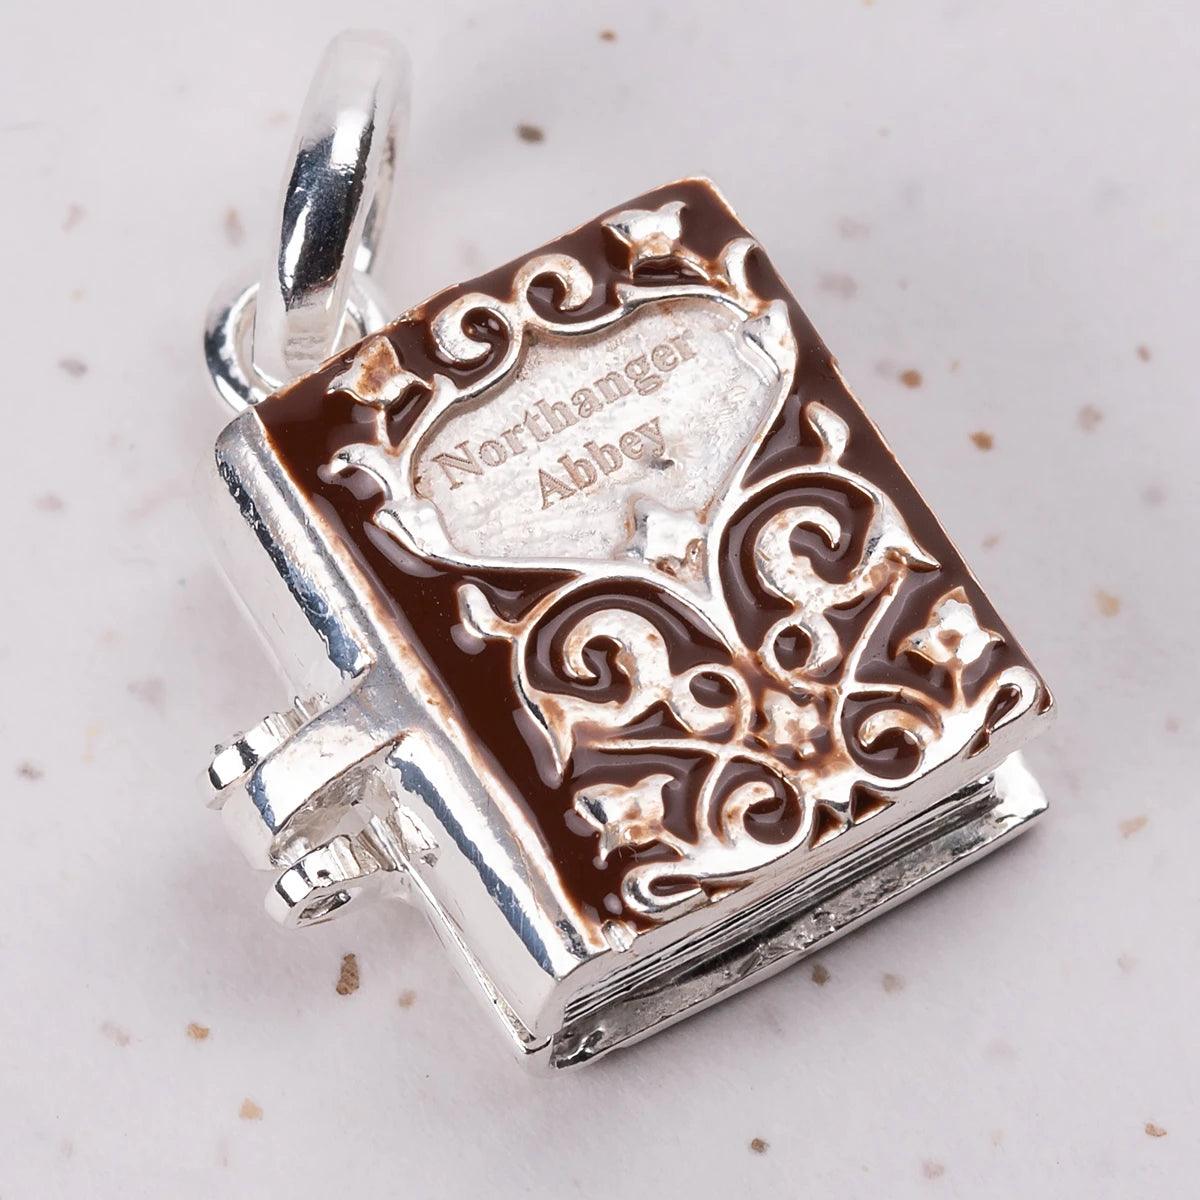 Northanger Abbey Silver and Enamel Book Charm Pendant - JaneAusten.co.uk